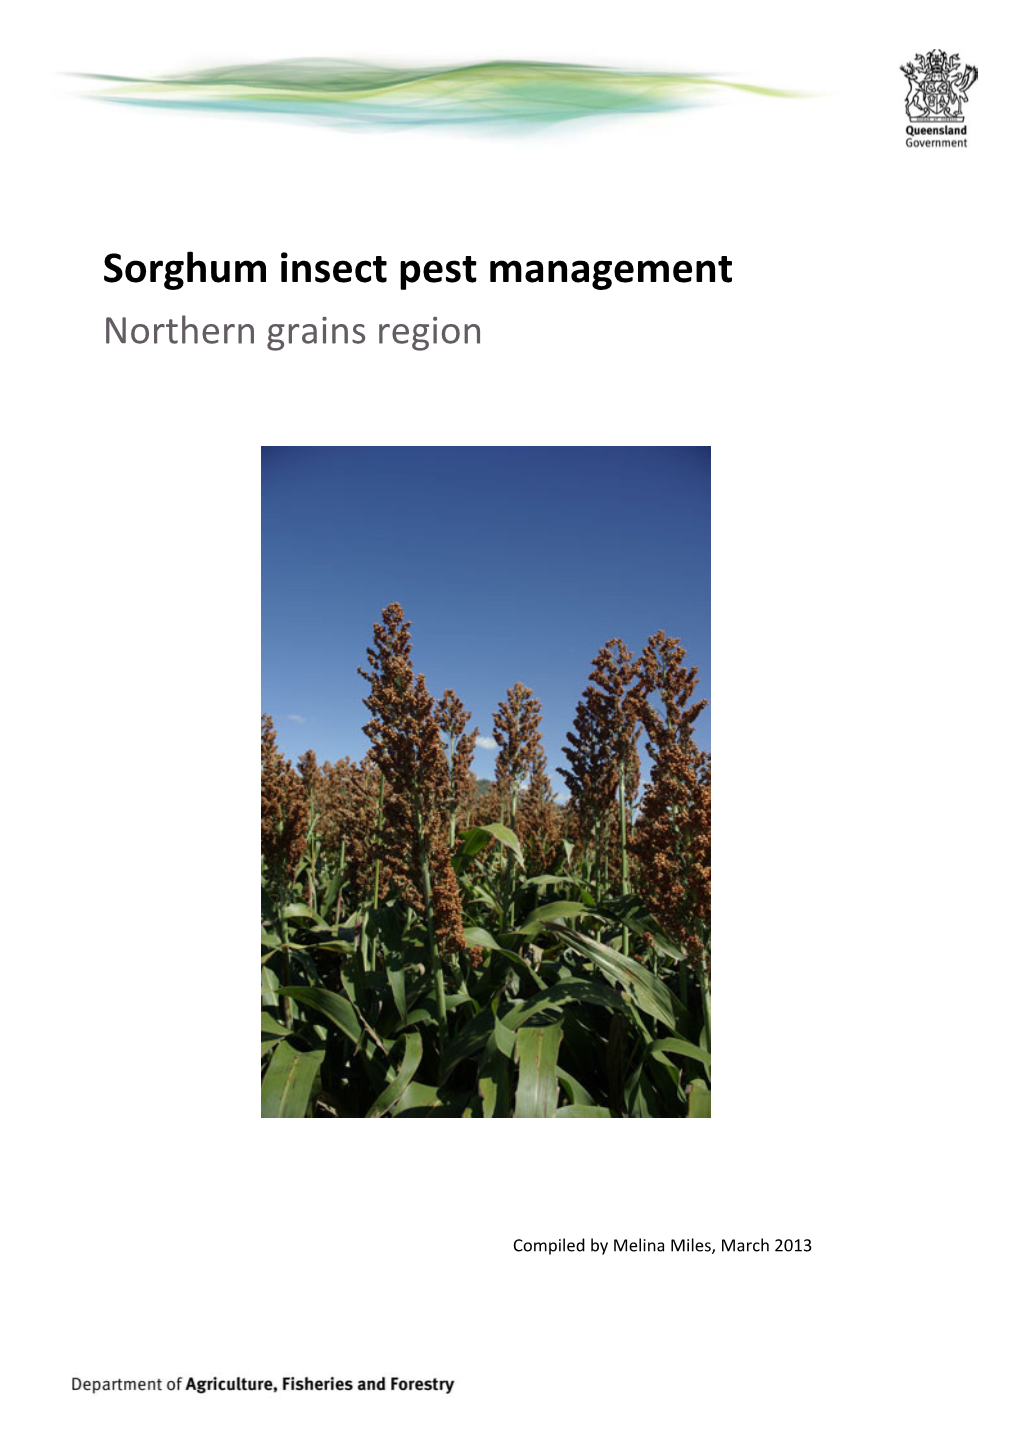 Sorghum Insect Pest Management Northern Grains Region